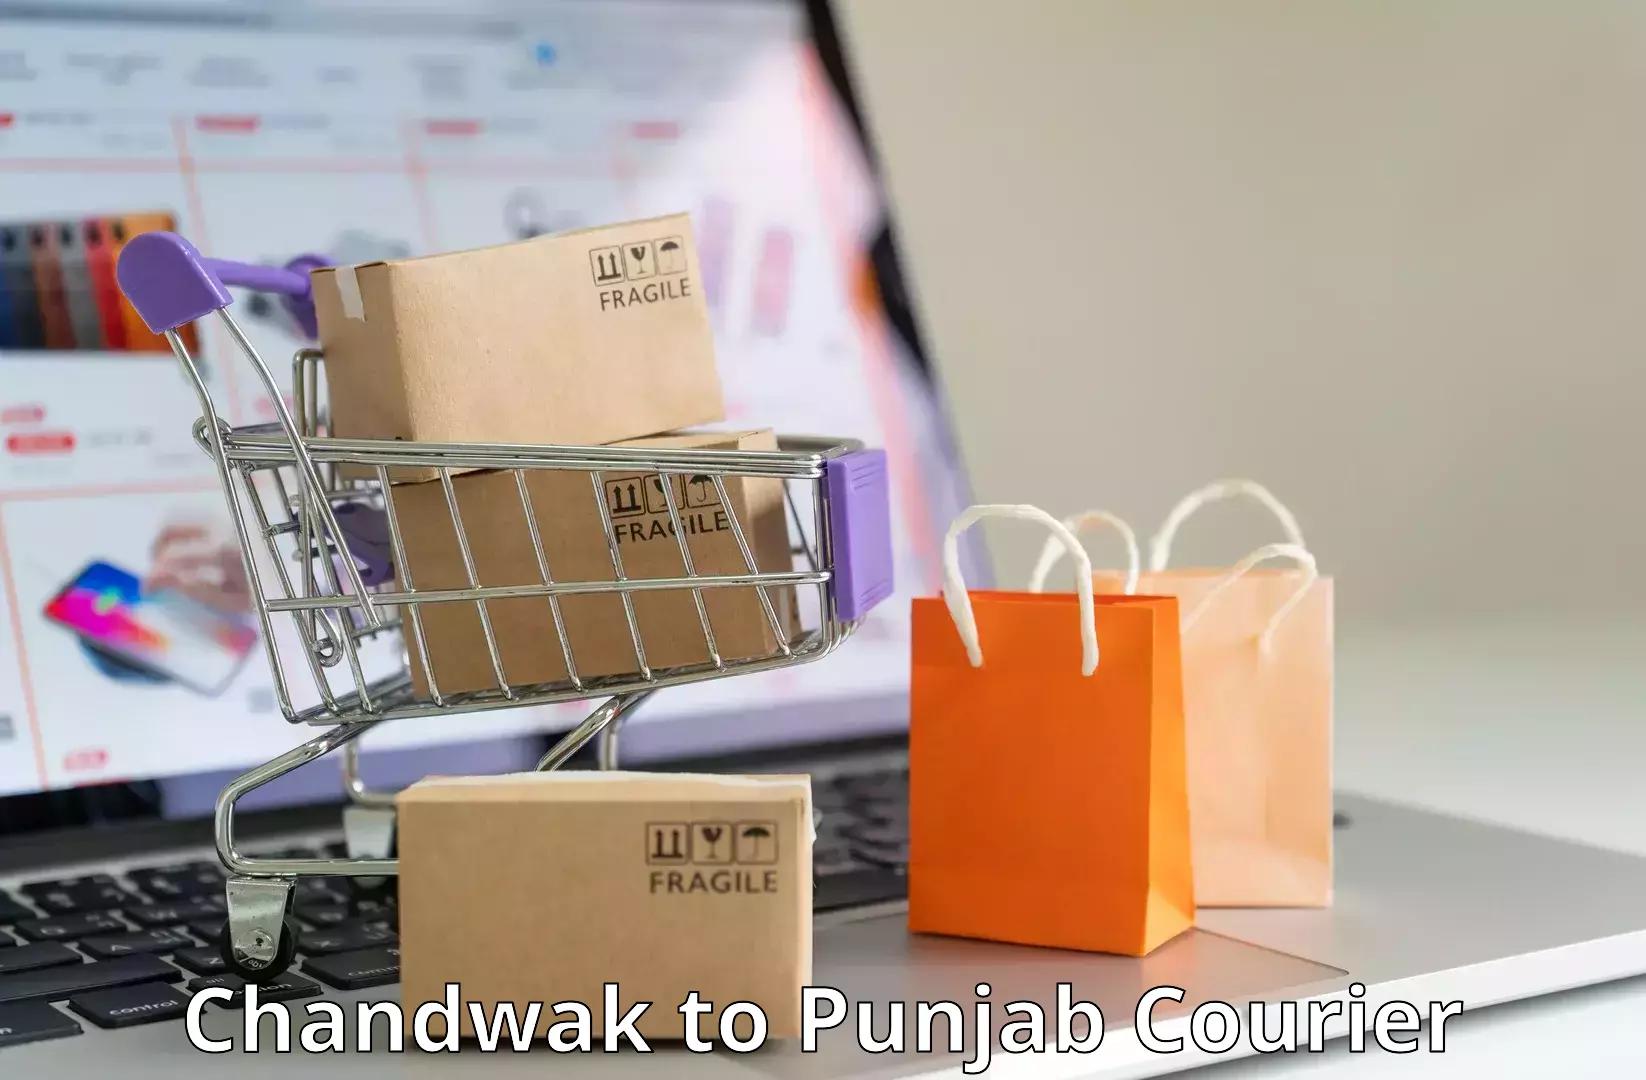 Efficient package consolidation Chandwak to Punjab